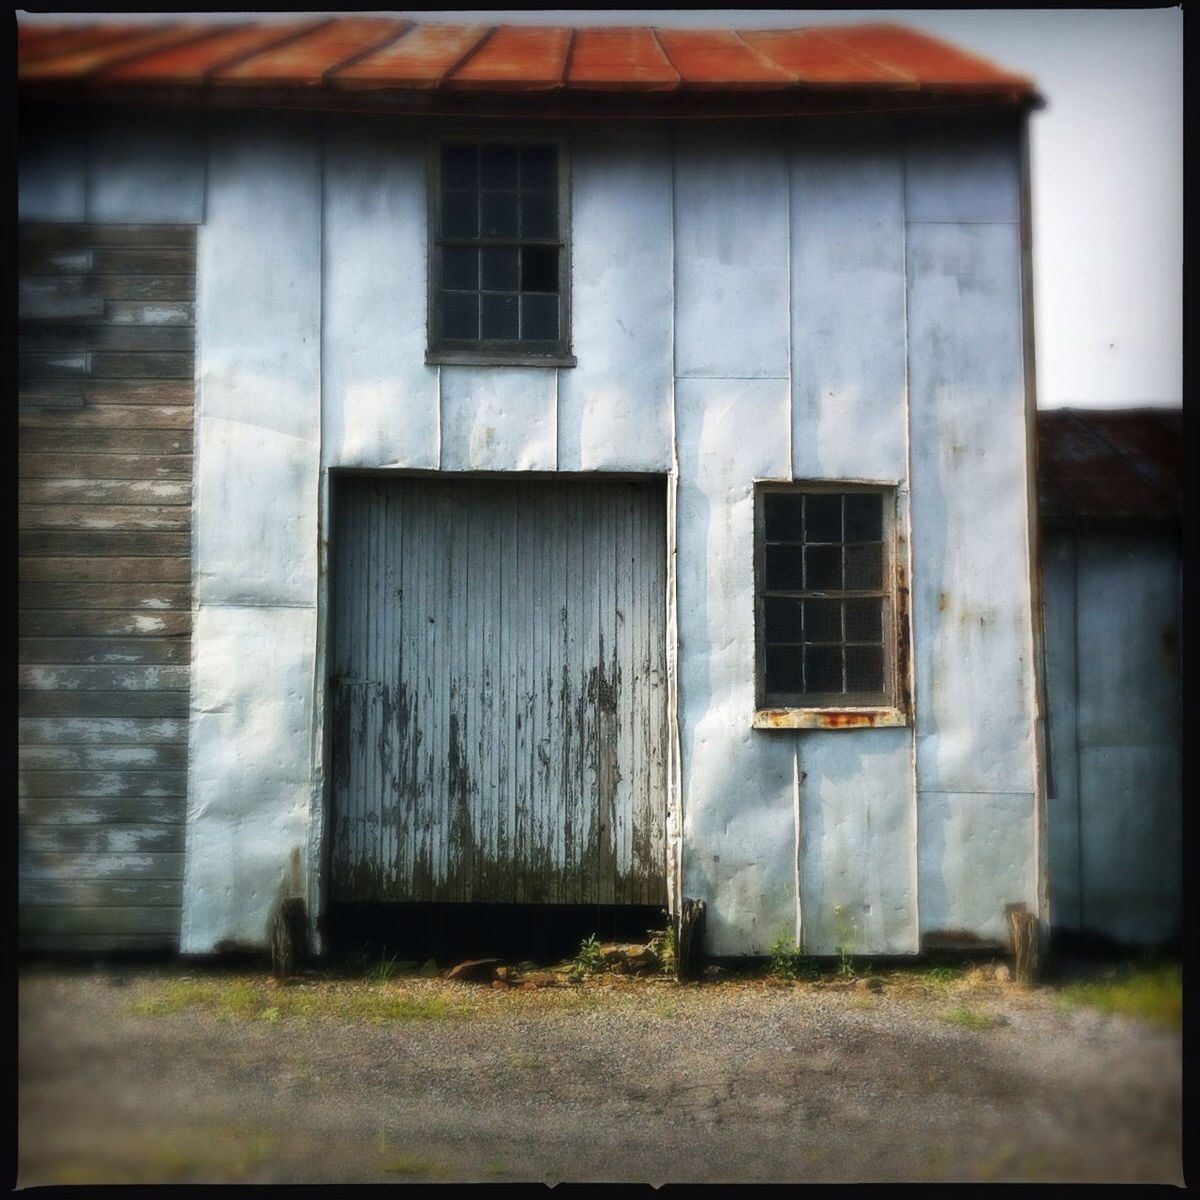 building exterior, architecture, built structure, window, house, door, closed, residential structure, abandoned, residential building, old, day, outdoors, building, no people, weathered, facade, auto post production filter, exterior, obsolete